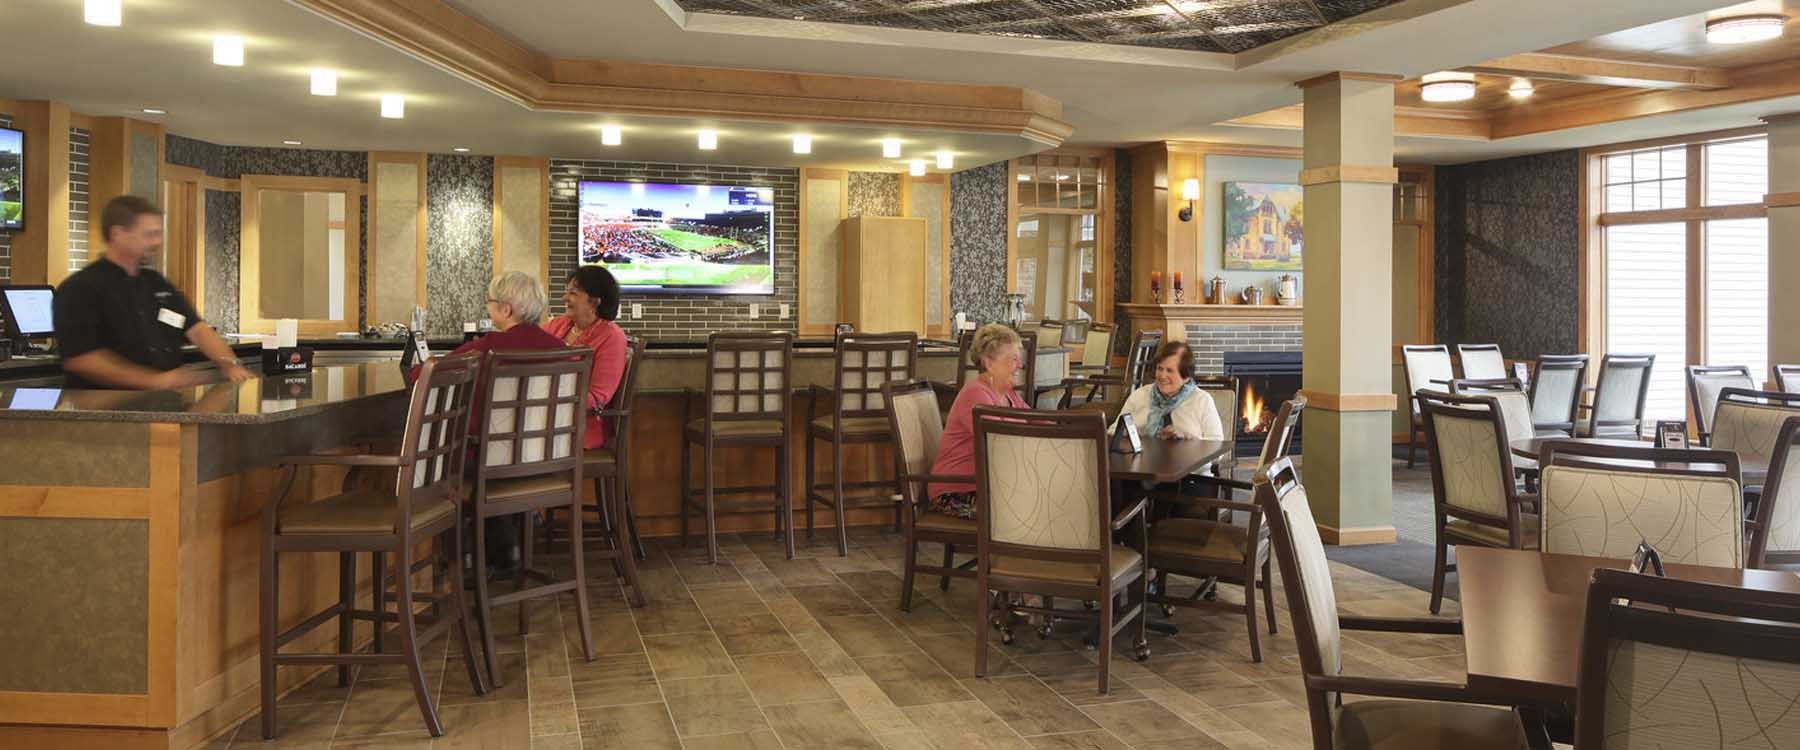 Lutheran Homes of Oconomowoc Bar and Social Area supports socialization and provides space for seniors to gather